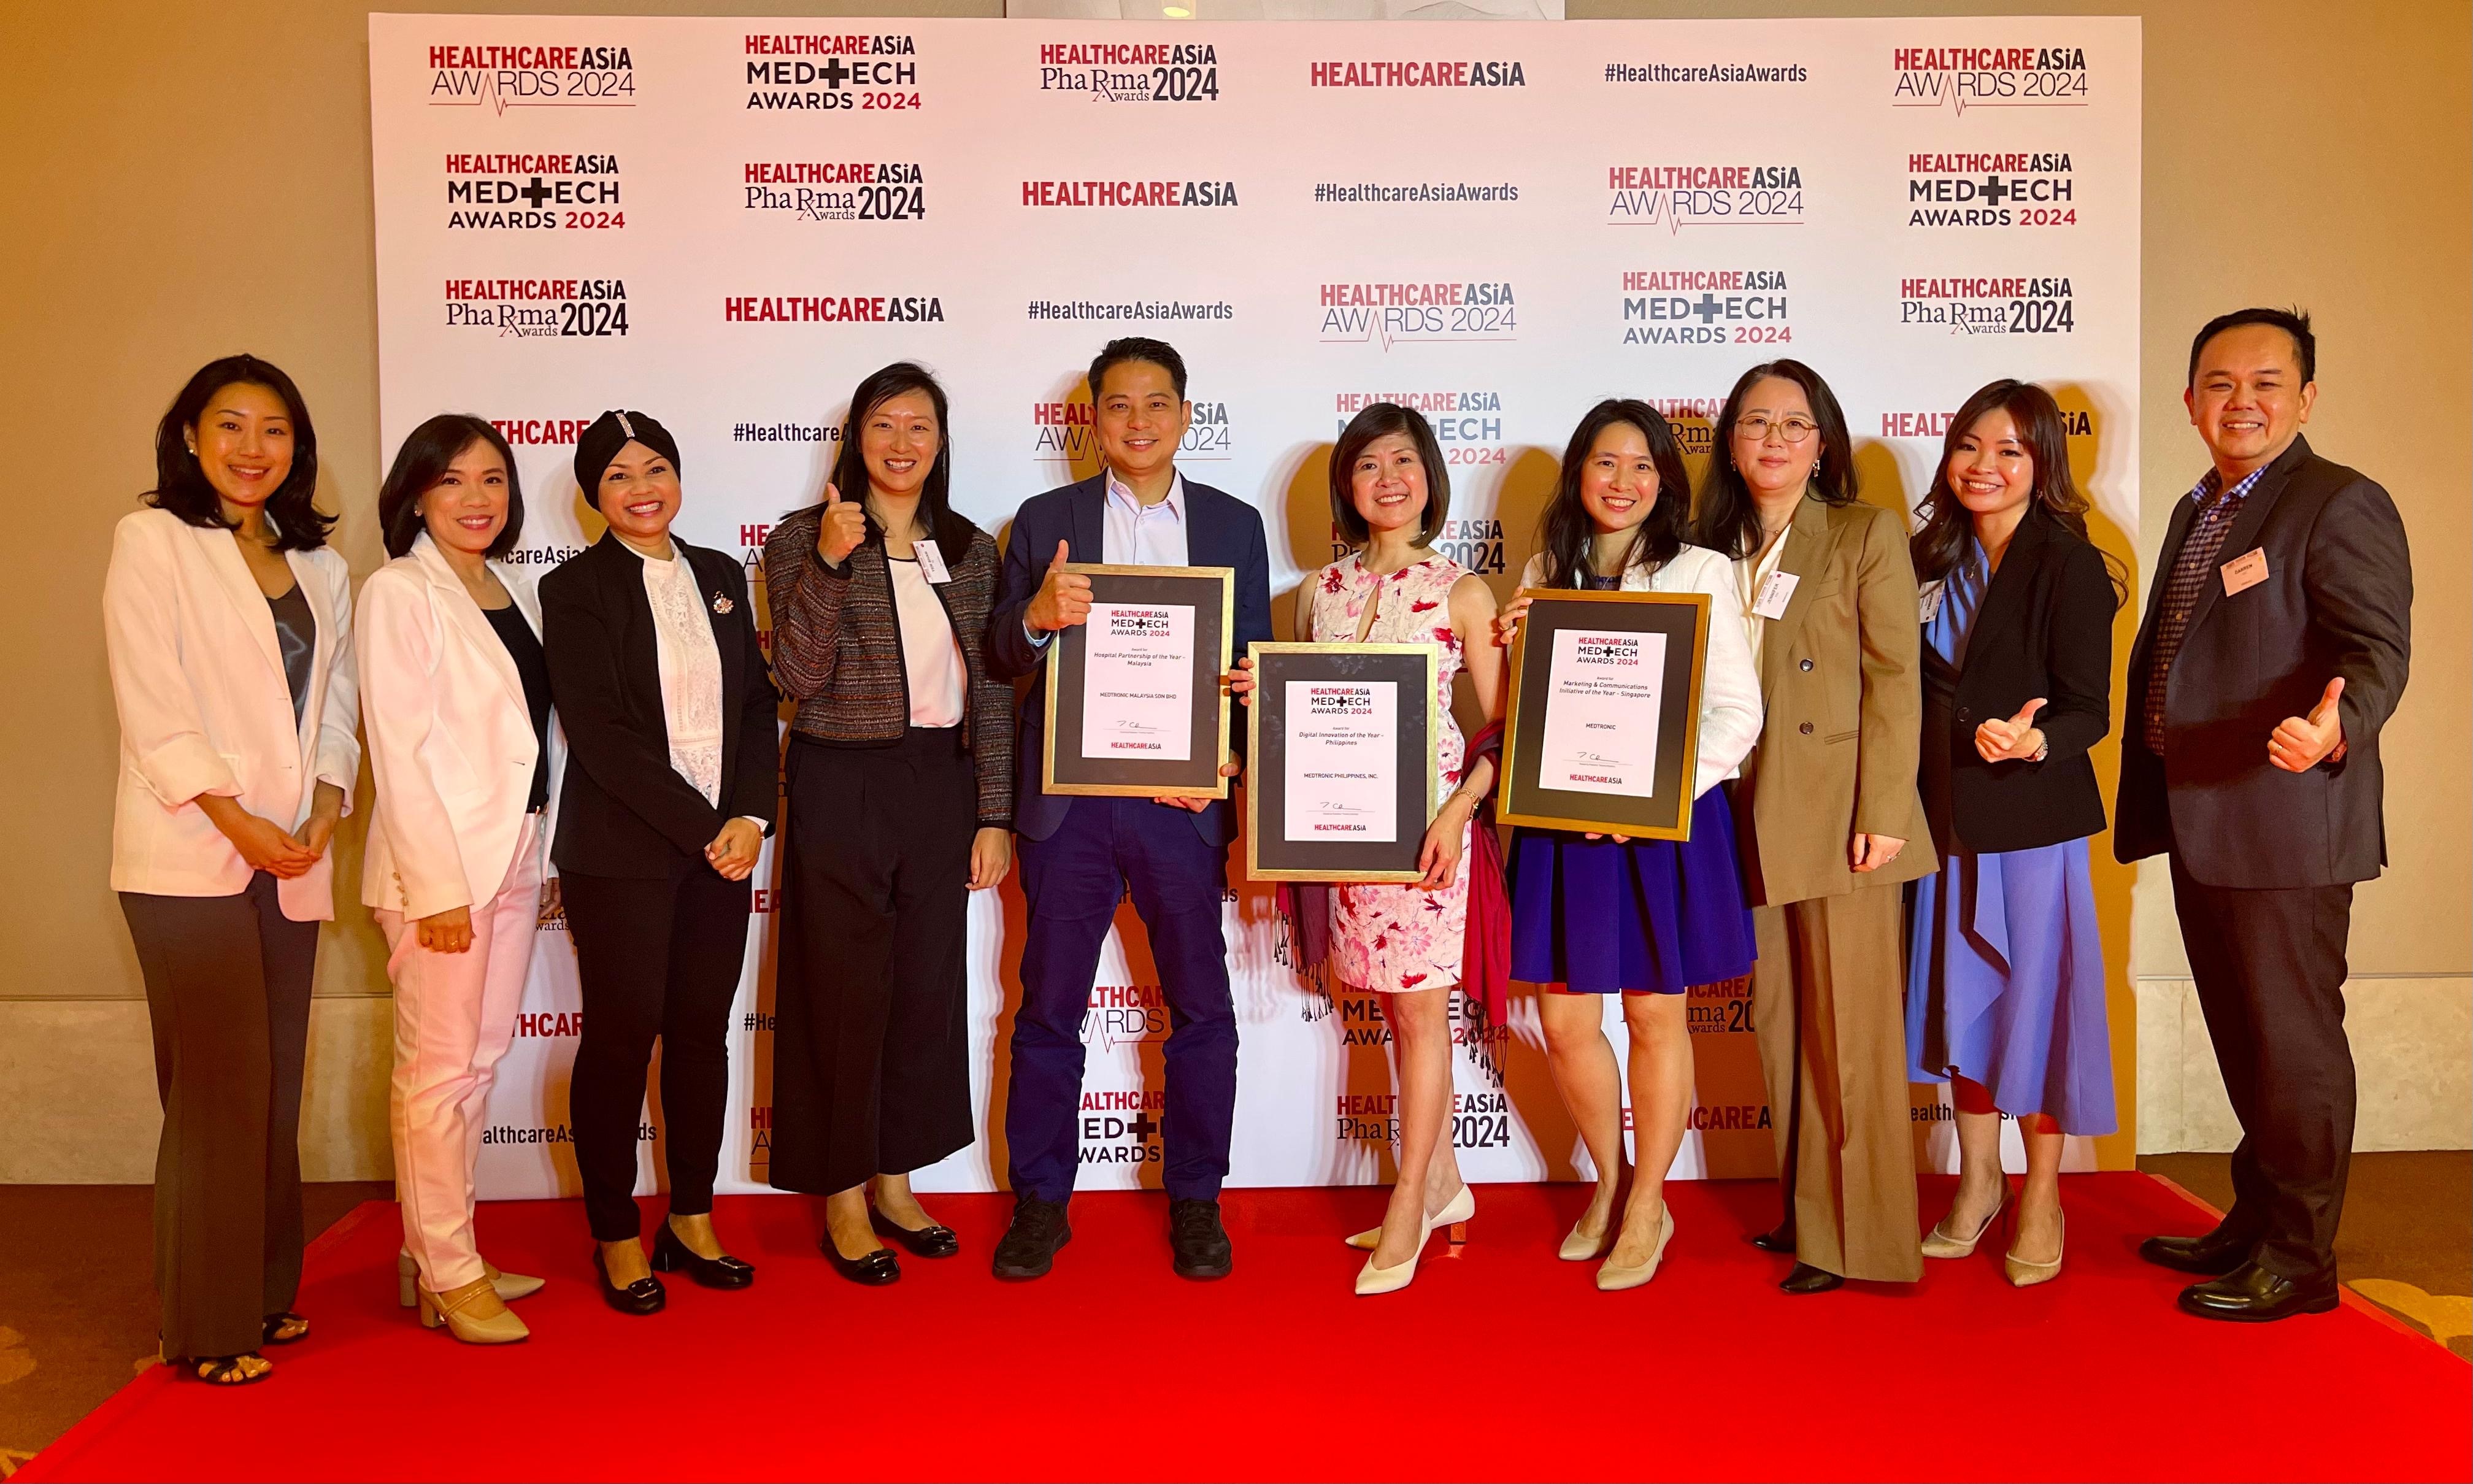 Medtronic receives top accolade in 3 countries at Healthcare Asia Medtech Awards 2024